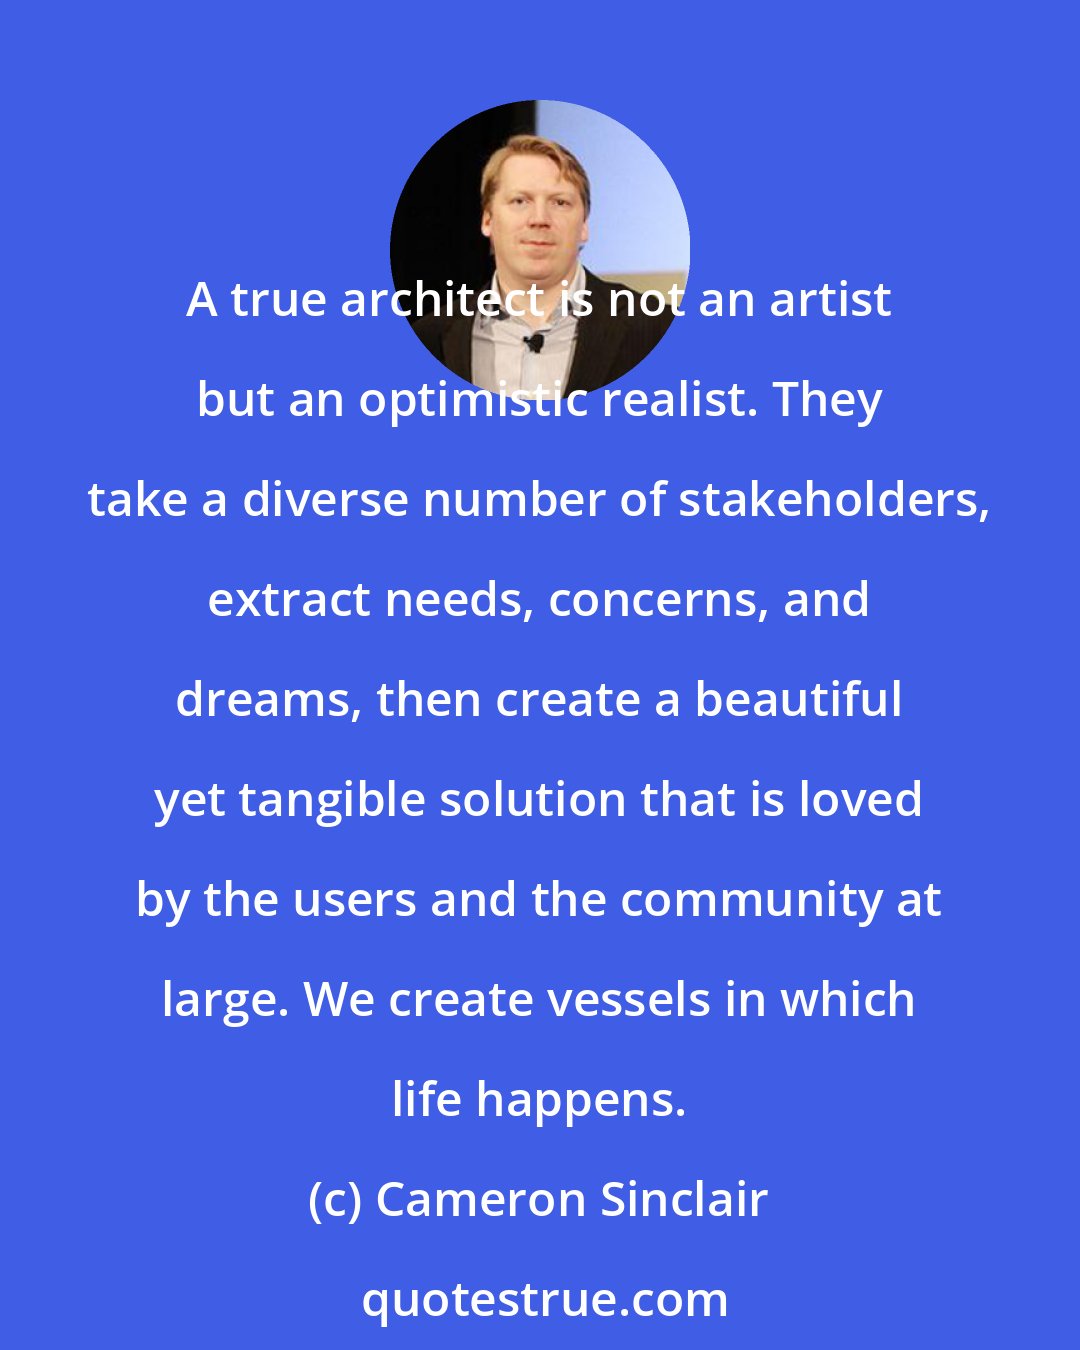 Cameron Sinclair: A true architect is not an artist but an optimistic realist. They take a diverse number of stakeholders, extract needs, concerns, and dreams, then create a beautiful yet tangible solution that is loved by the users and the community at large. We create vessels in which life happens.